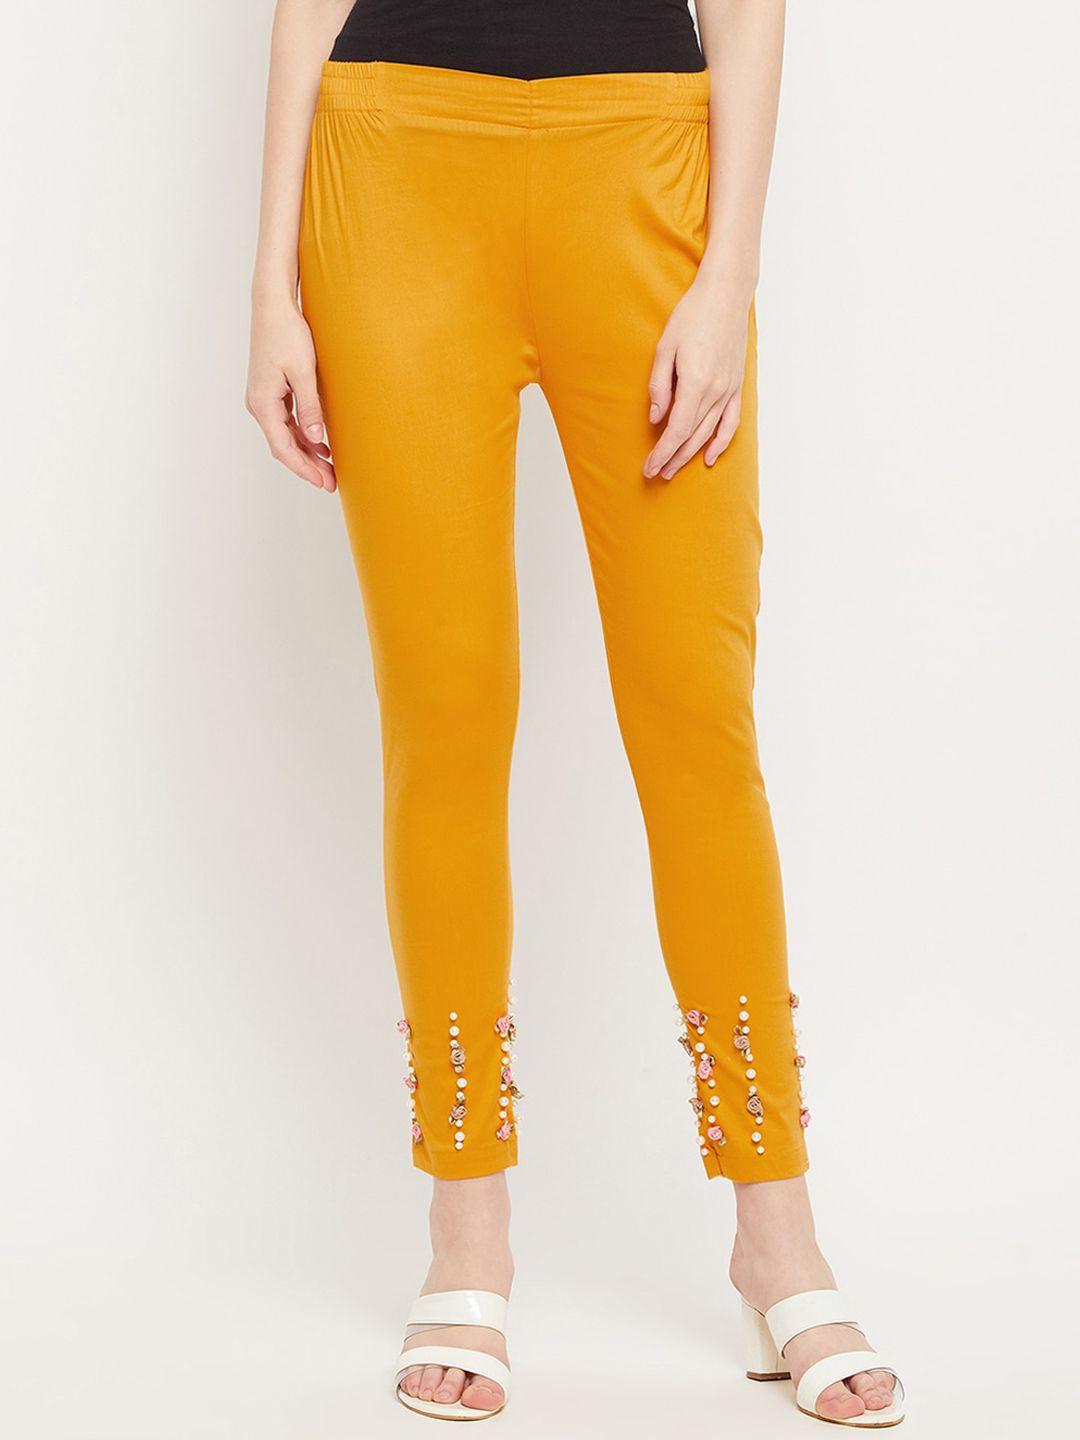 clora creation women mustard yellow embroidered smart easy wash cotton cigarette trousers